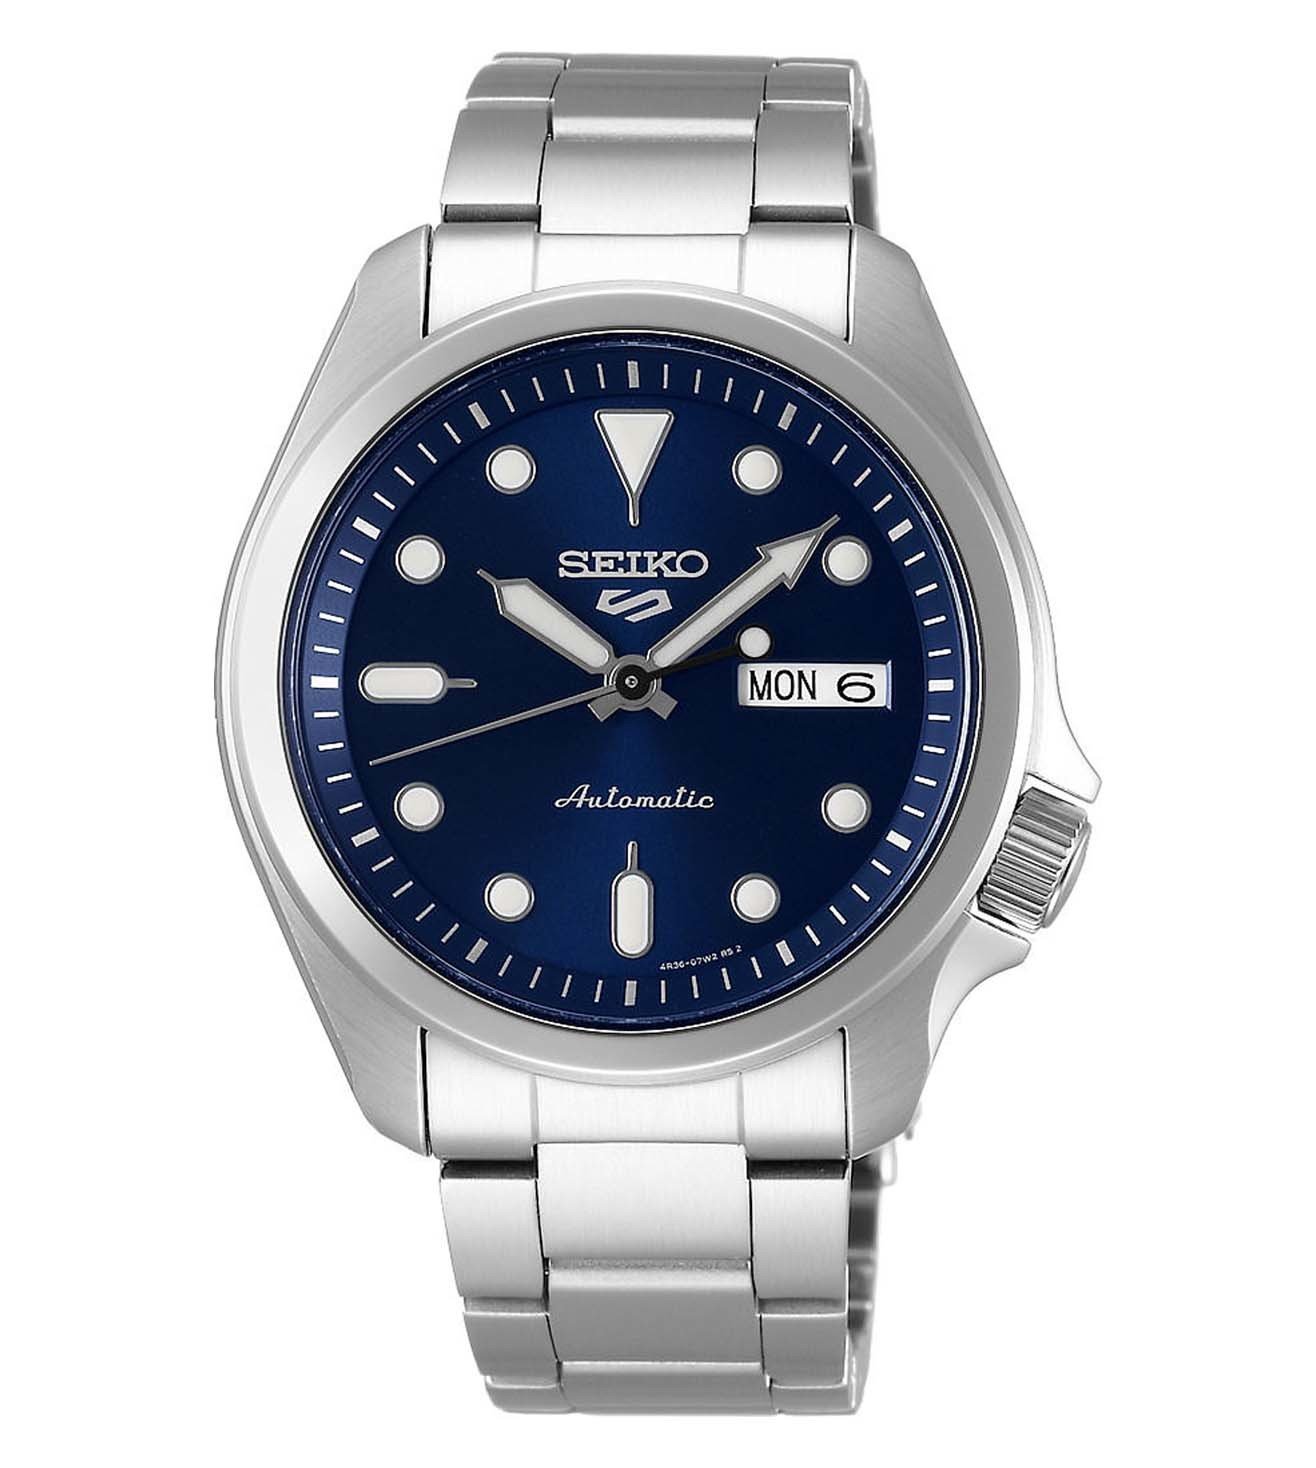 SRPE53K1 | SEIKO 5 Sports Automatic Watch for Men